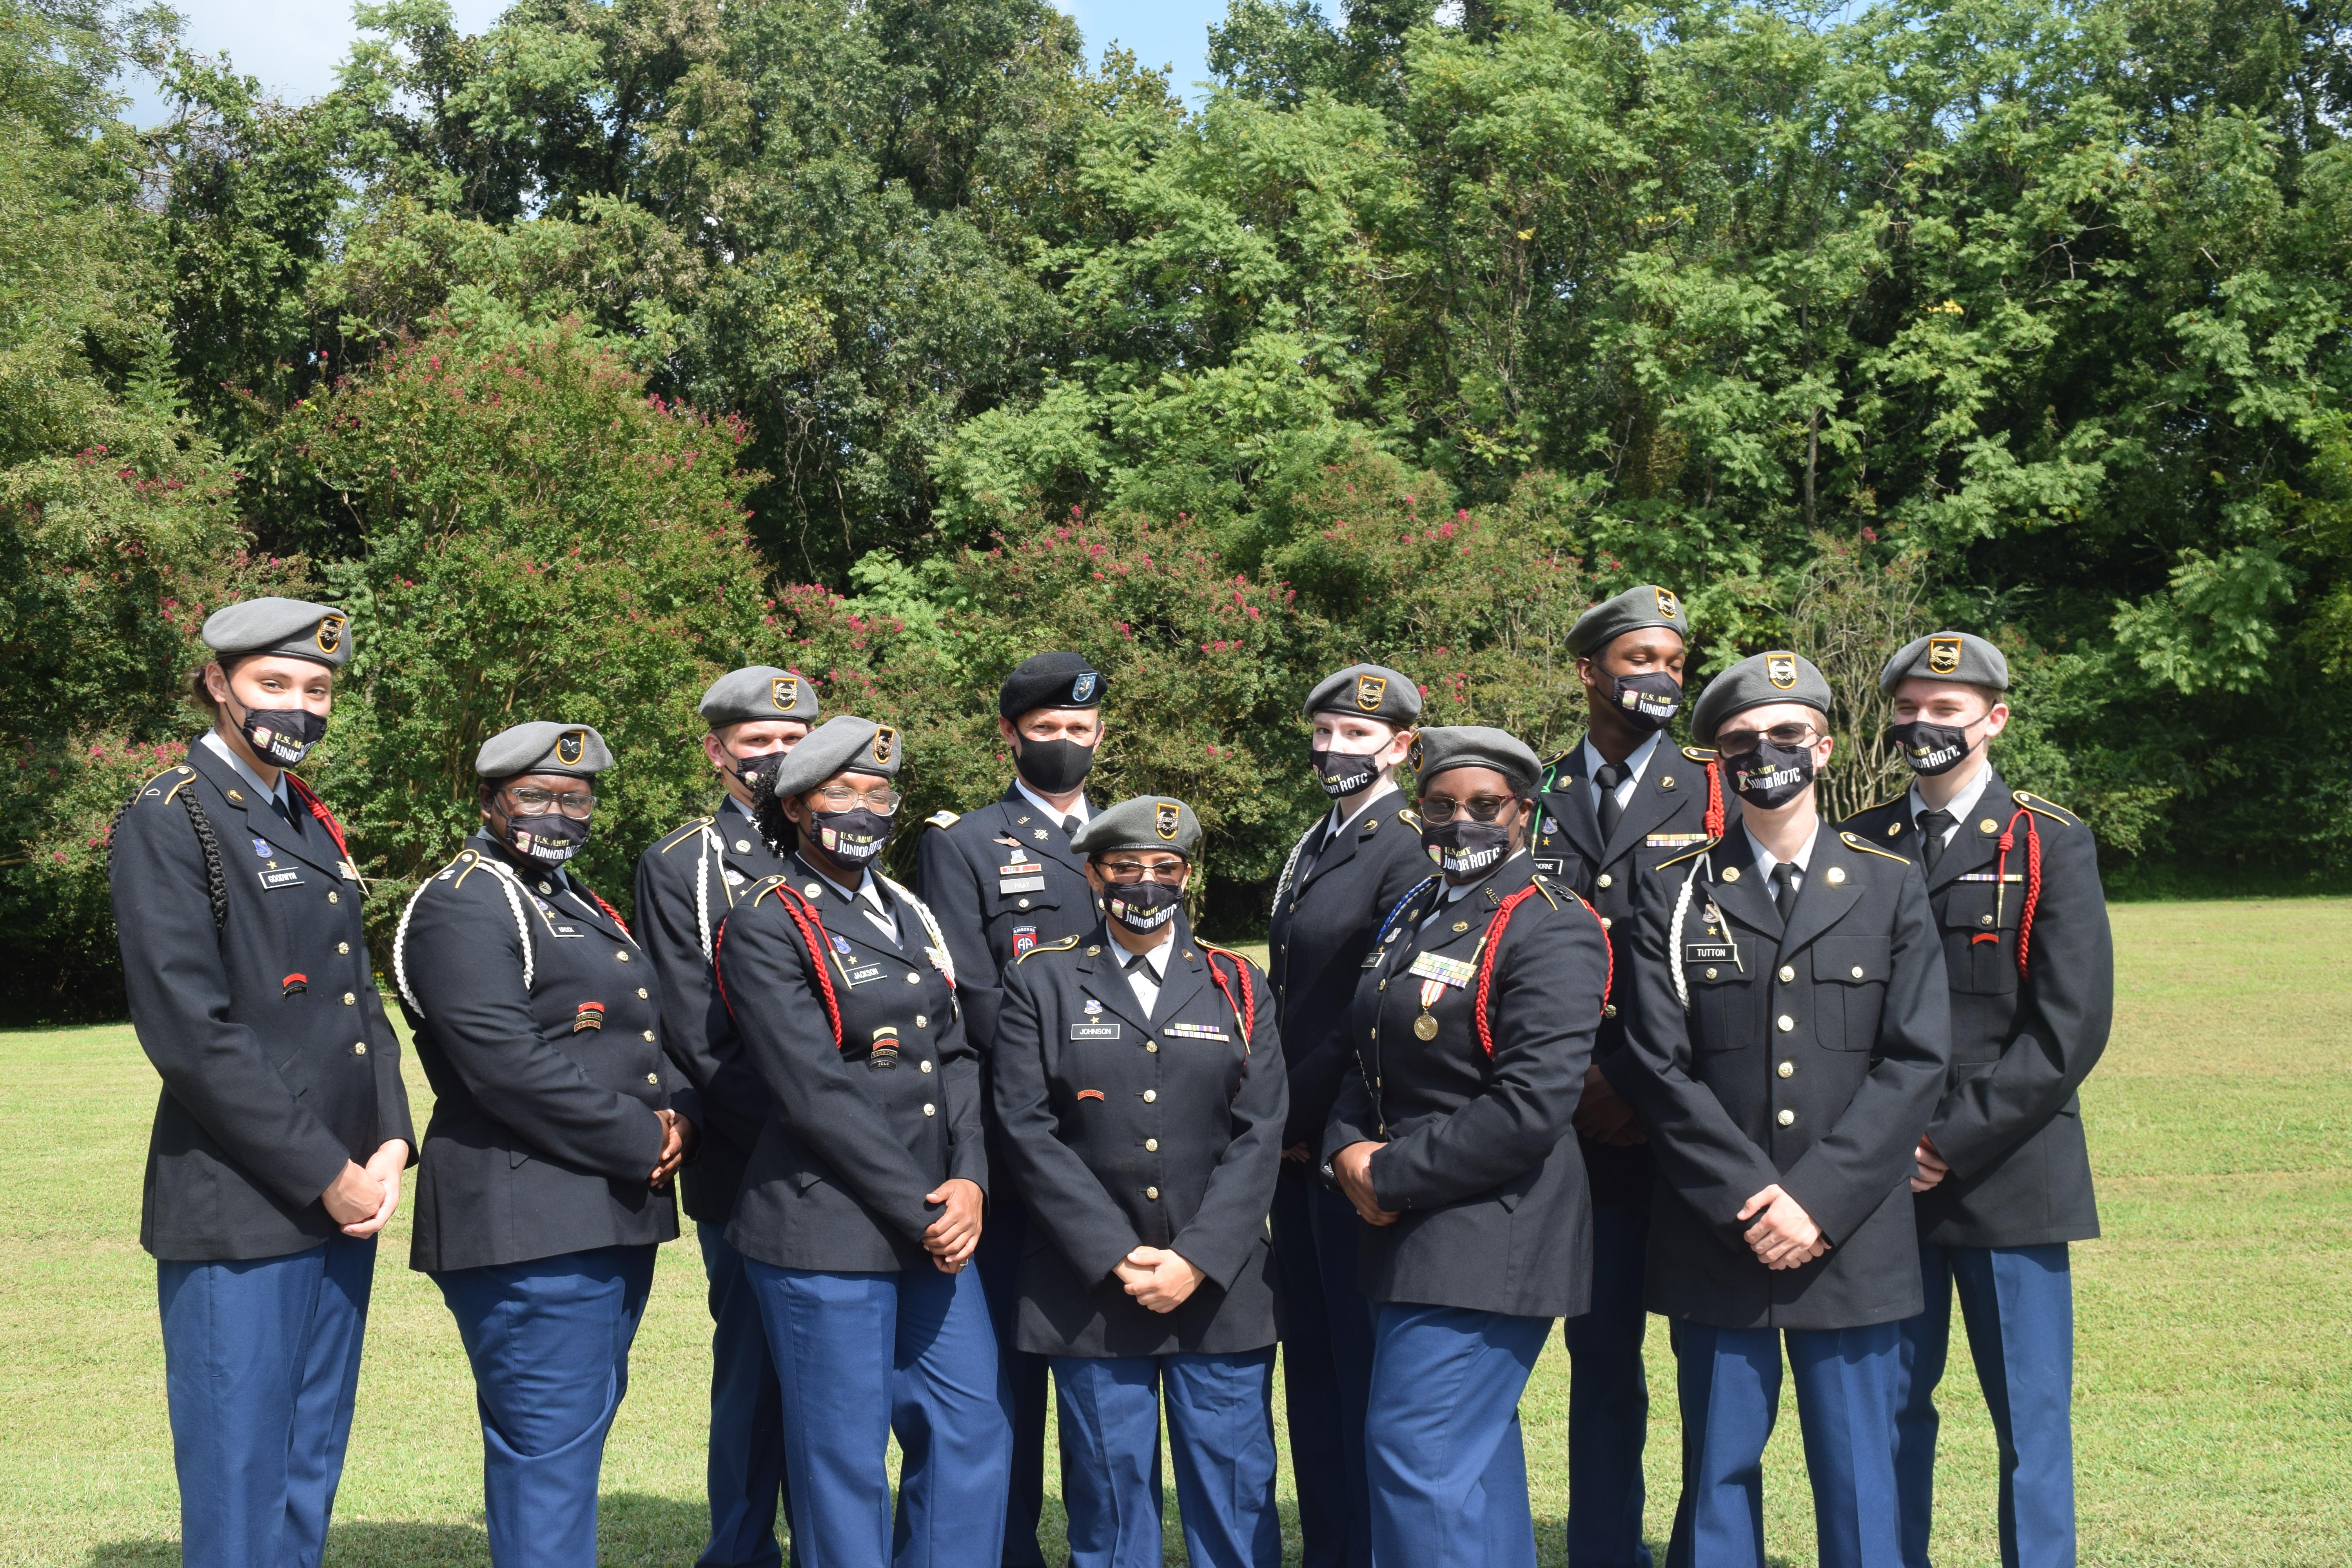 The image is of HHS’ JROTC members in their uniforms, posing for a group shot at Weston Manor on 9/15/21